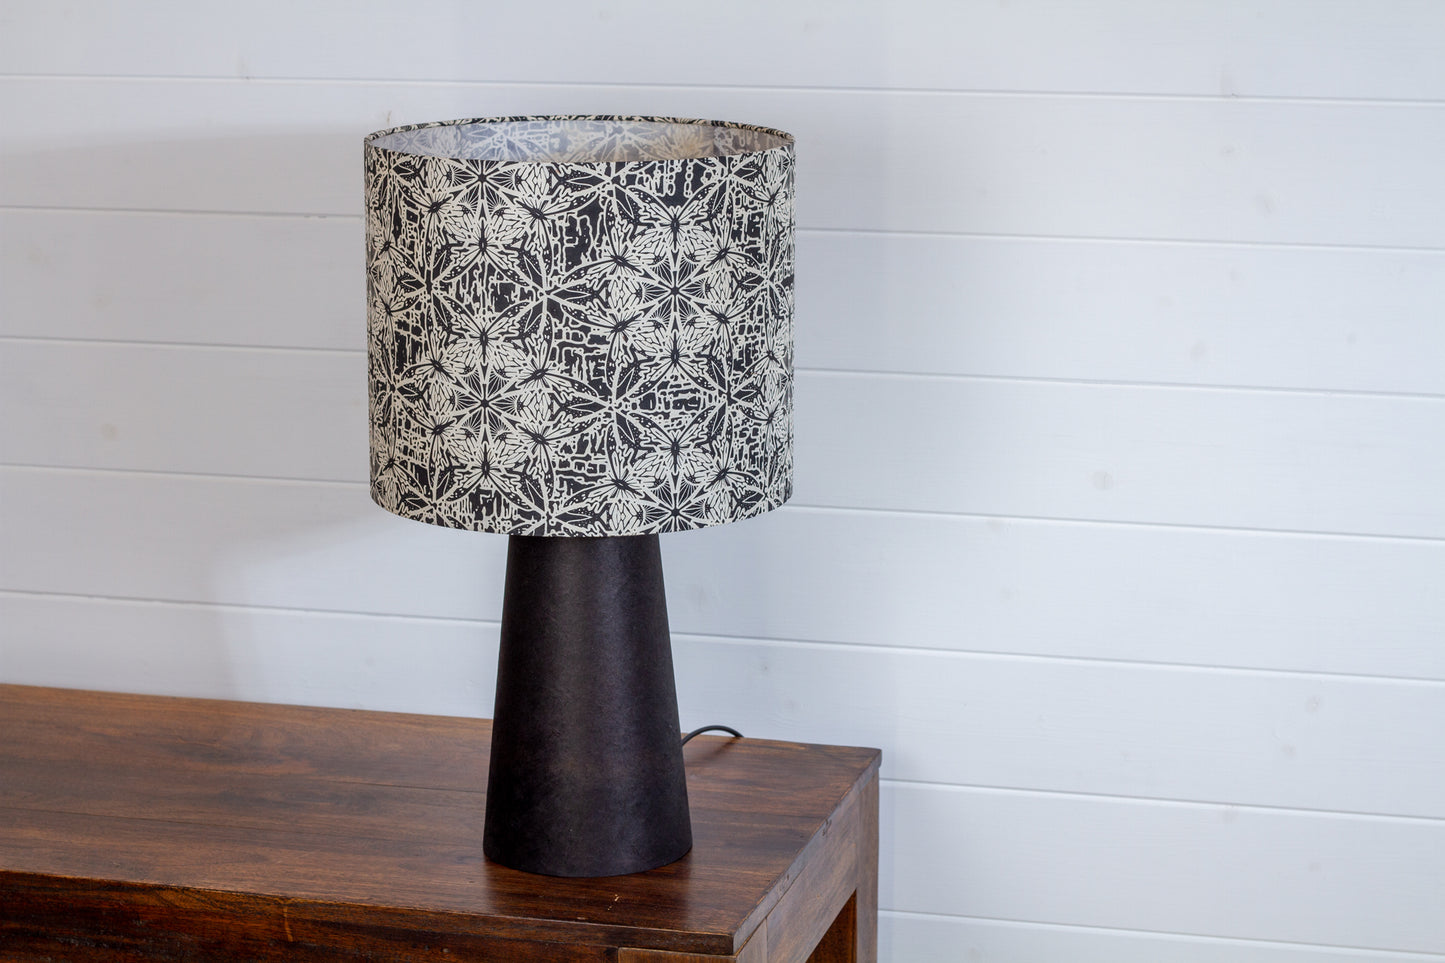 Matching Table Lamp Medium with Drum Lamp Shade ~ Butterfly Kaleidoscope Black (B136)